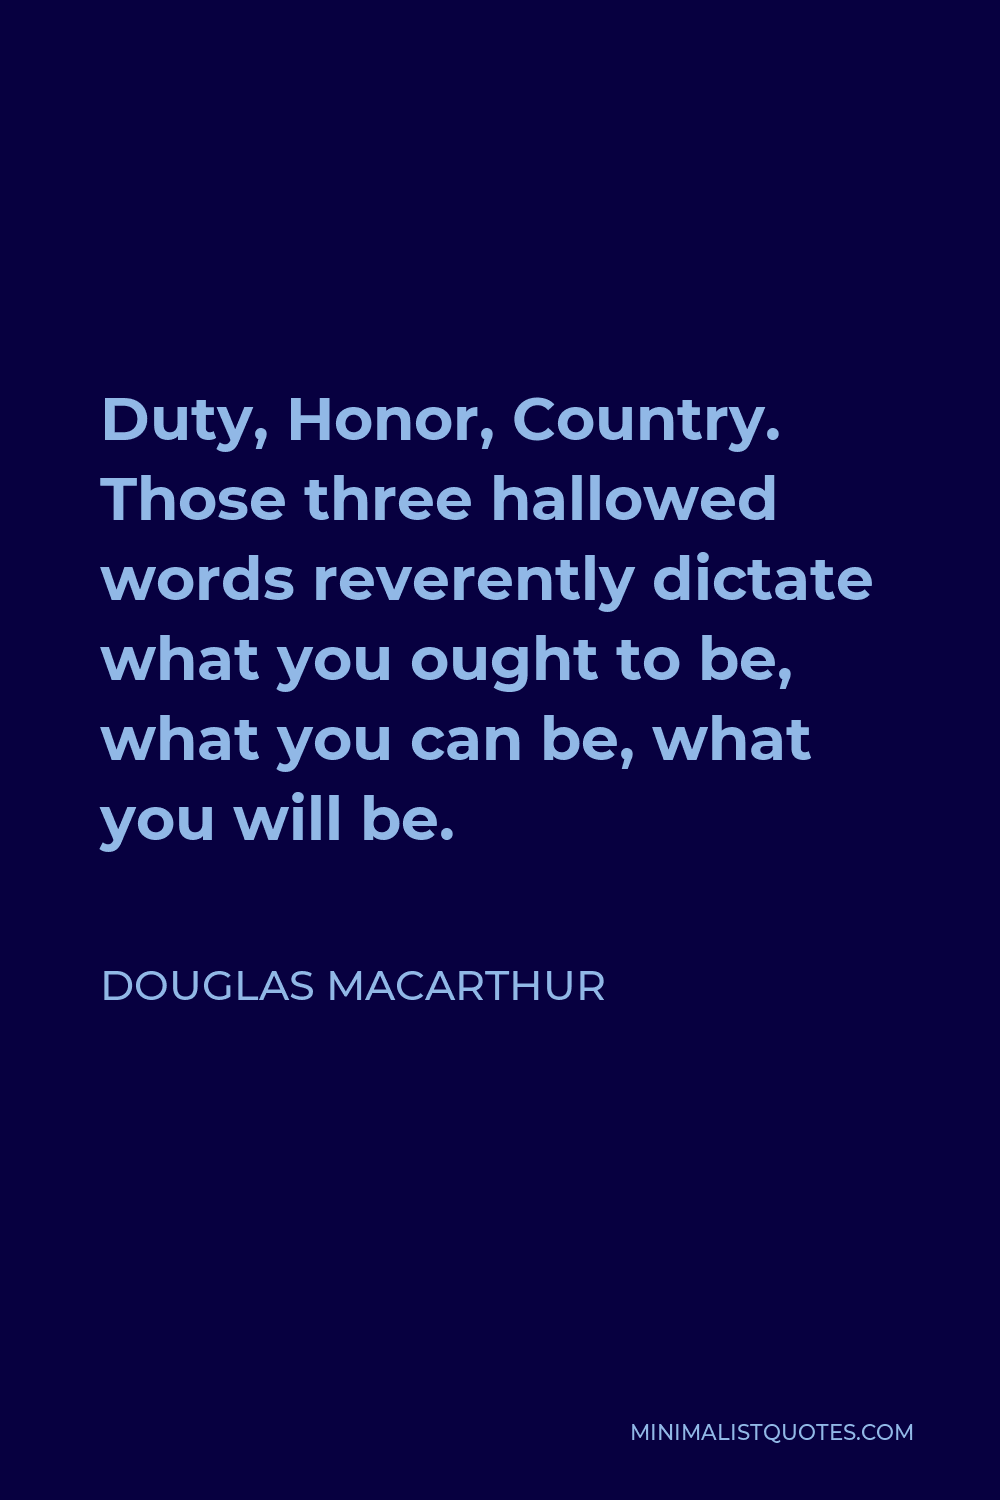 Douglas MacArthur Quote - “Duty, Honor, Country” – those three hallowed words reverently dictate what you ought to be, what you can be, what you will be. They are your rallying point to build courage when courage seems to fail, to regain faith when there seems to be little cause for faith, to create hope when hope becomes forlorn.